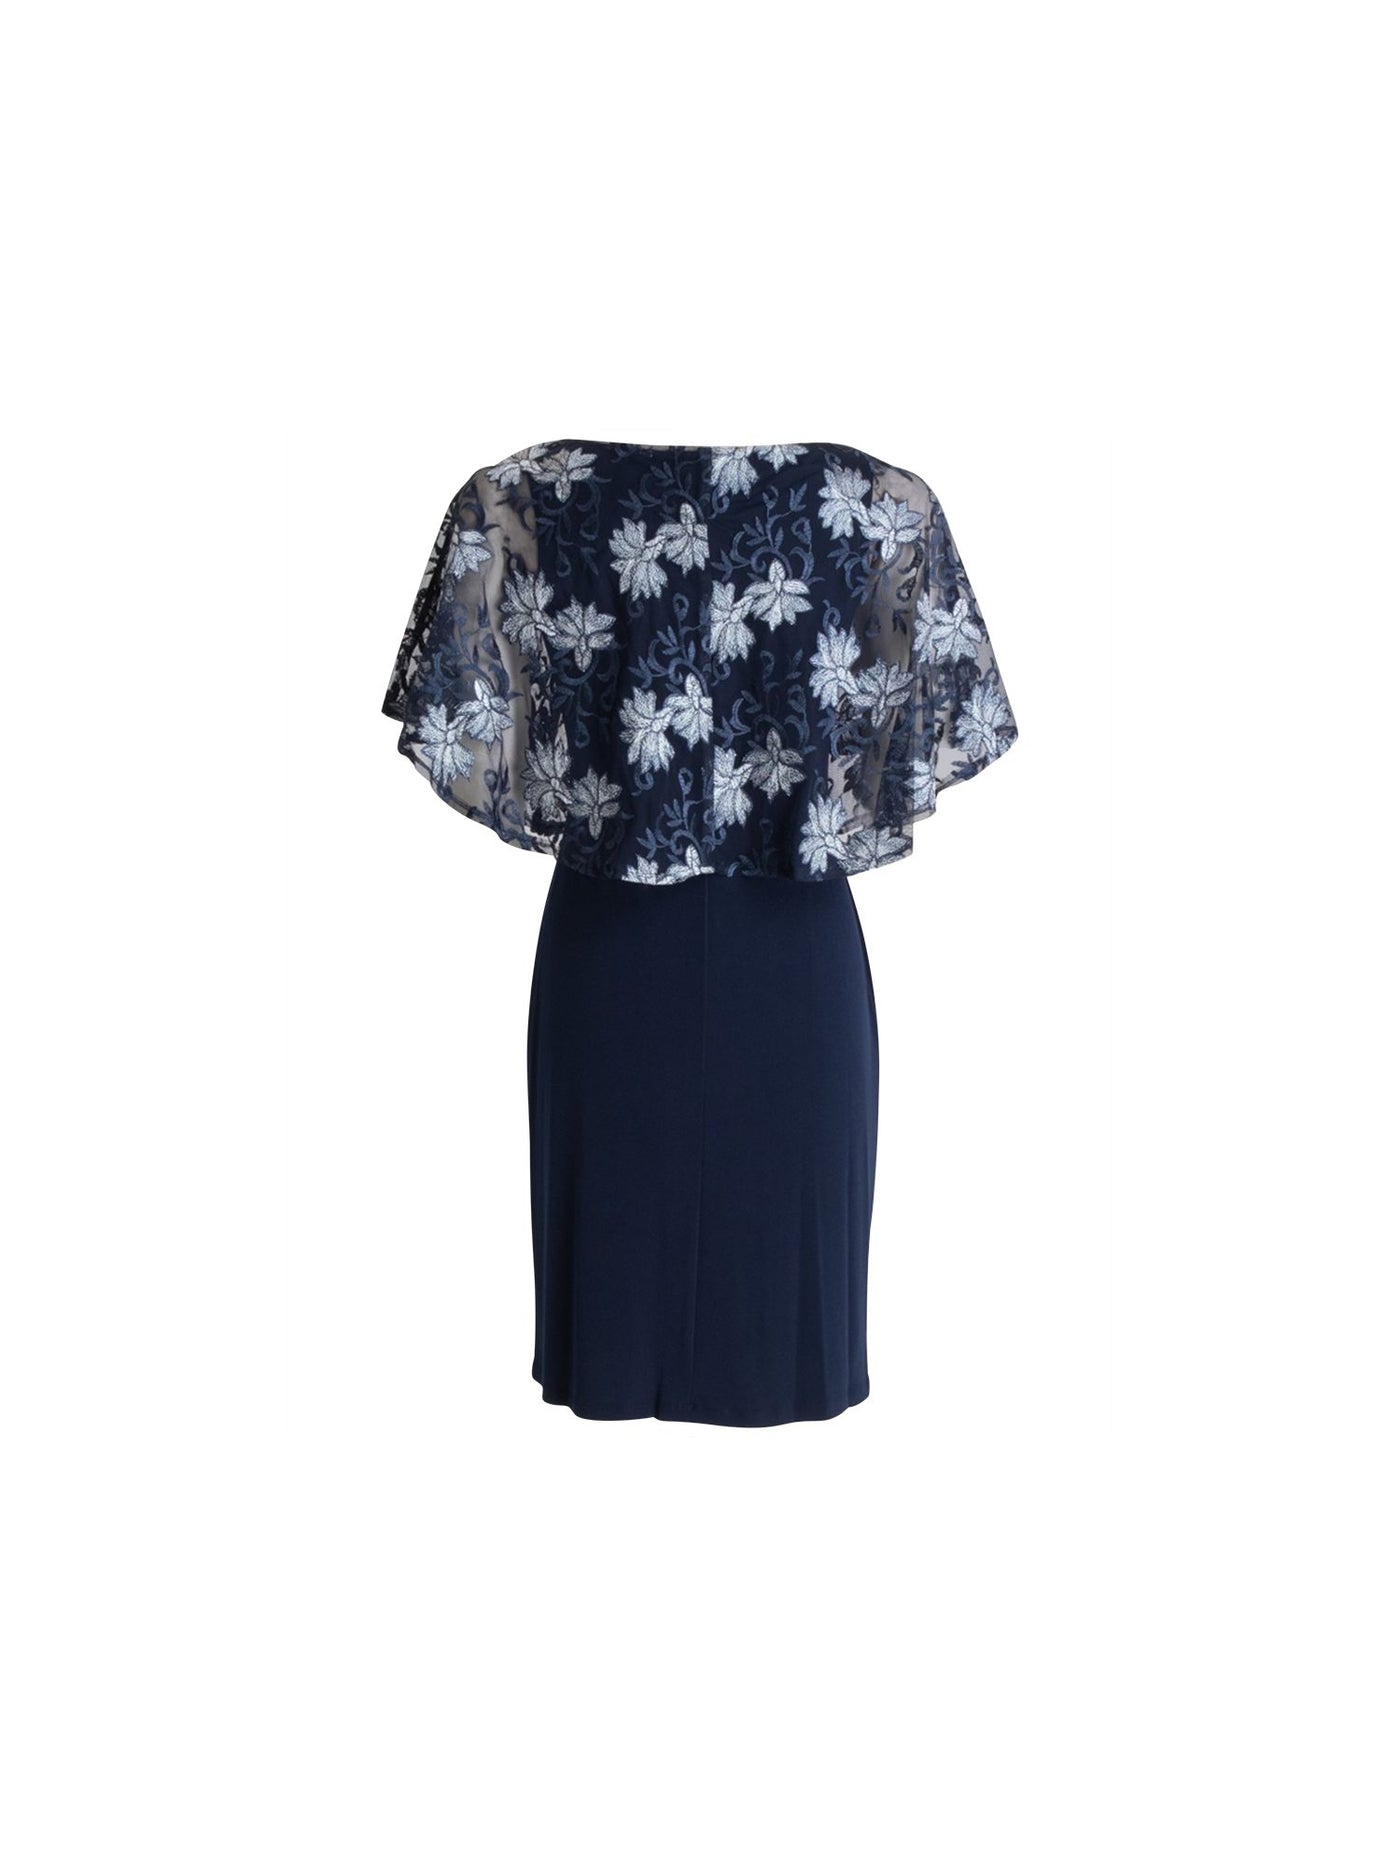 CONNECTED APPAREL Womens Navy Stretch Embroidered Popover Jersey-knit Floral Round Neck Above The Knee Evening Sheath Dress 22W